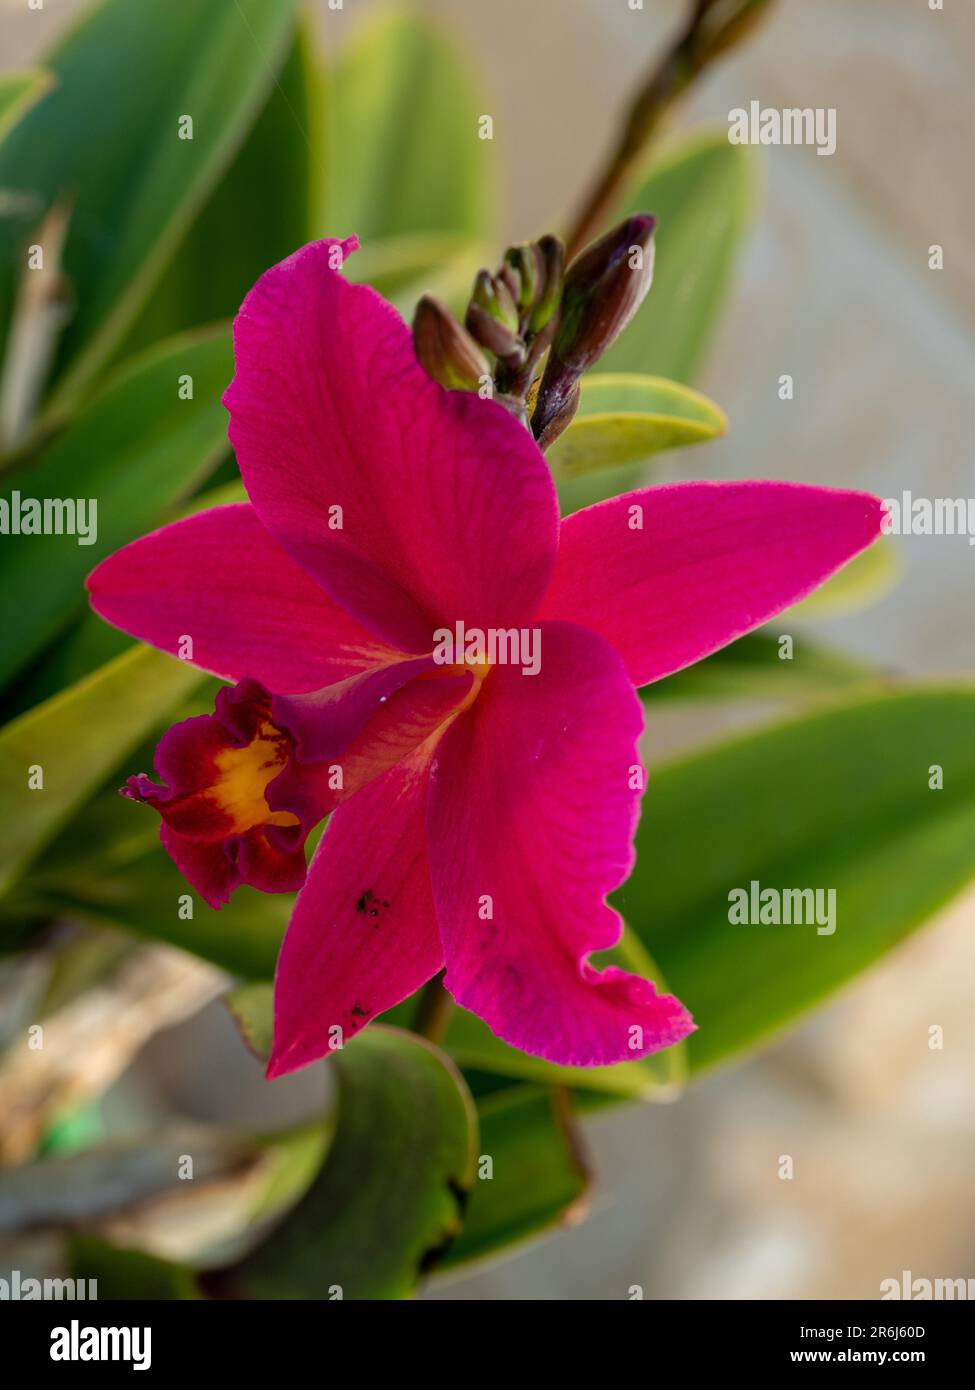 Closeup of cerise red bloom and buds of the Laeliocattleya orchid flower, Hsin Buu Lady, Australian coastal garden Stock Photo